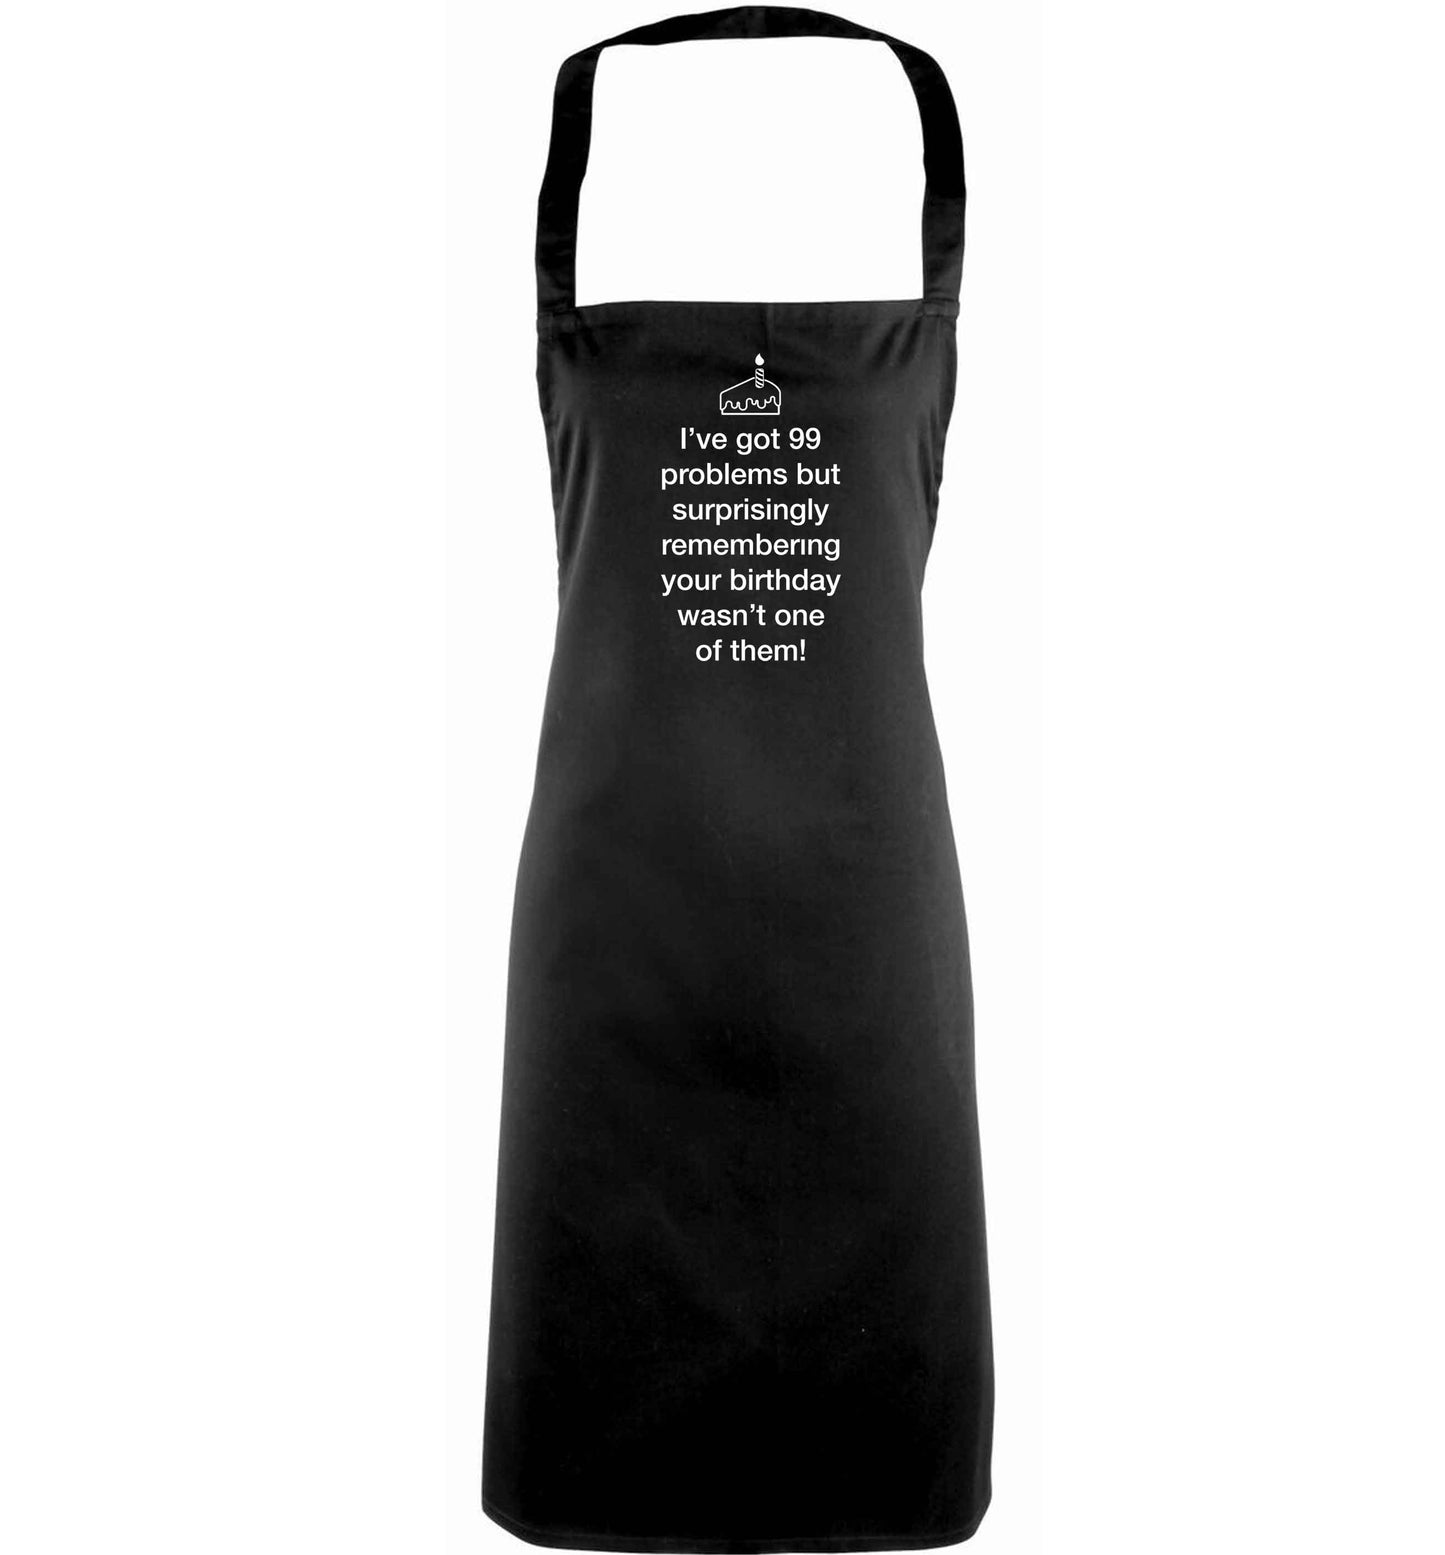 I've got 99 problems but surprisingly remembering your birthday wasn't one of them! adults black apron